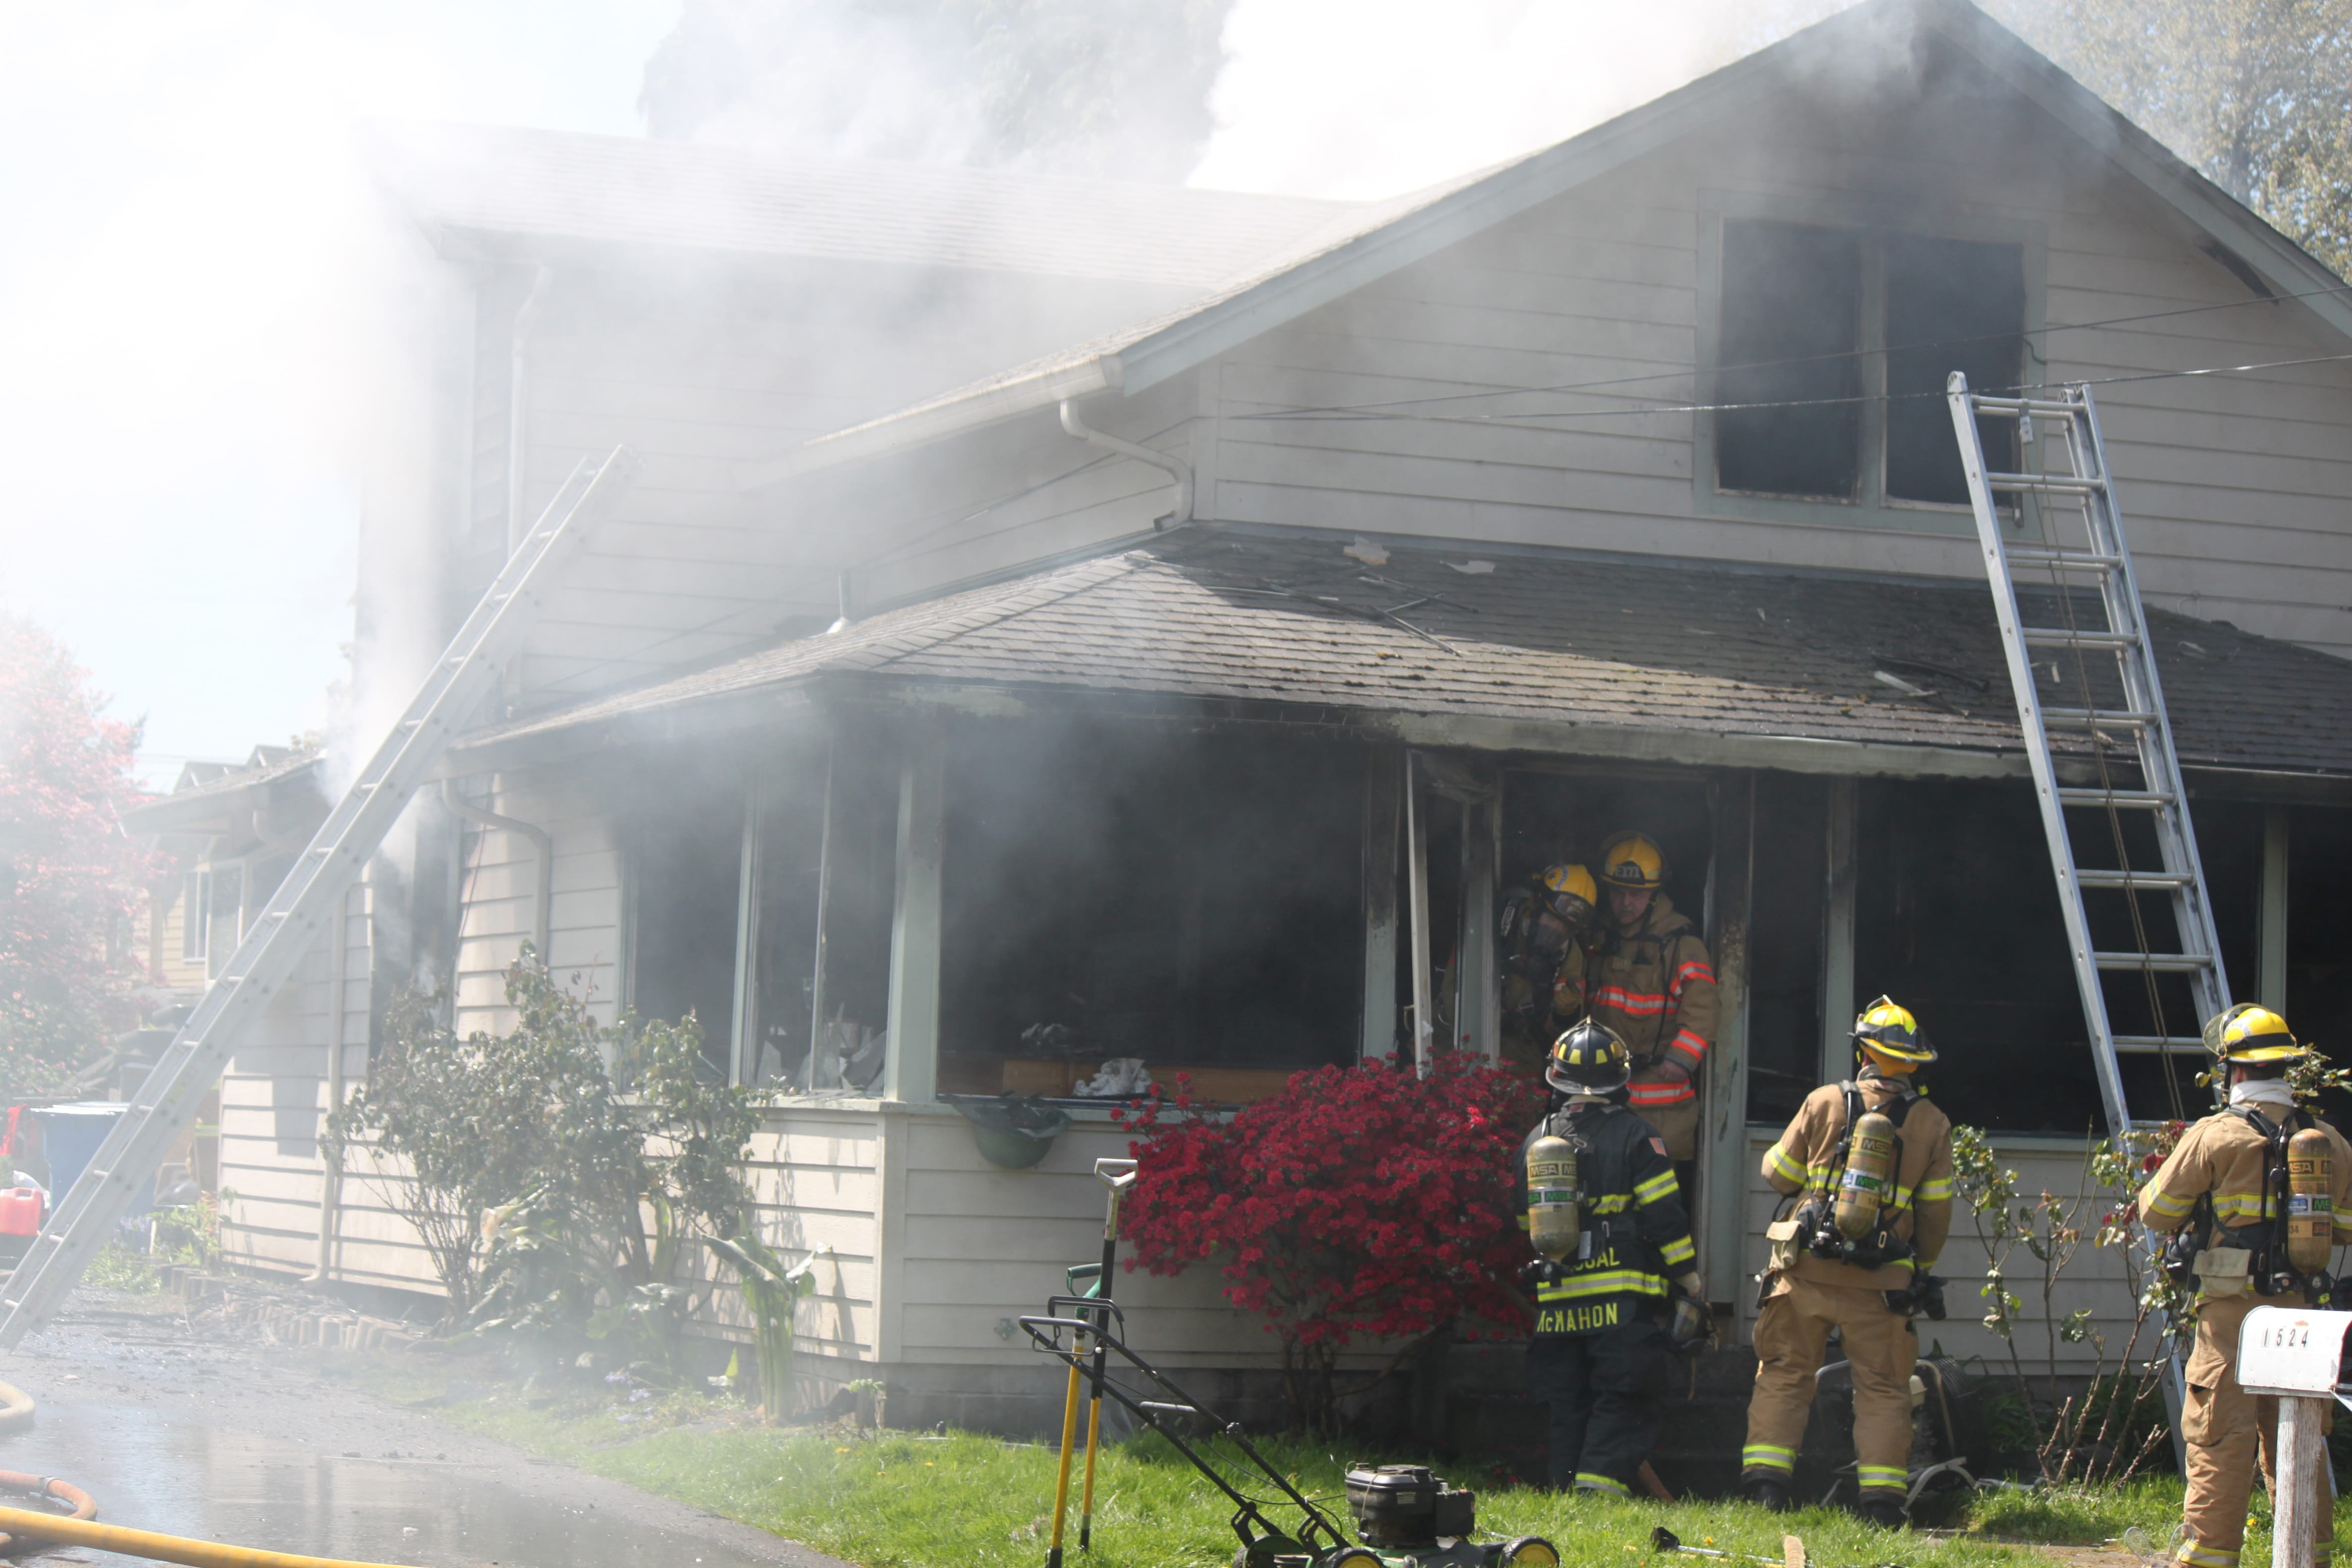 Emergency crews work to put out a house fire at 1524 S.E. Seventh Ave., in Camas. Firefighters from Camas, Washougal and East County Fire and Rescue were dispatched at approximately 11:30 a.m.